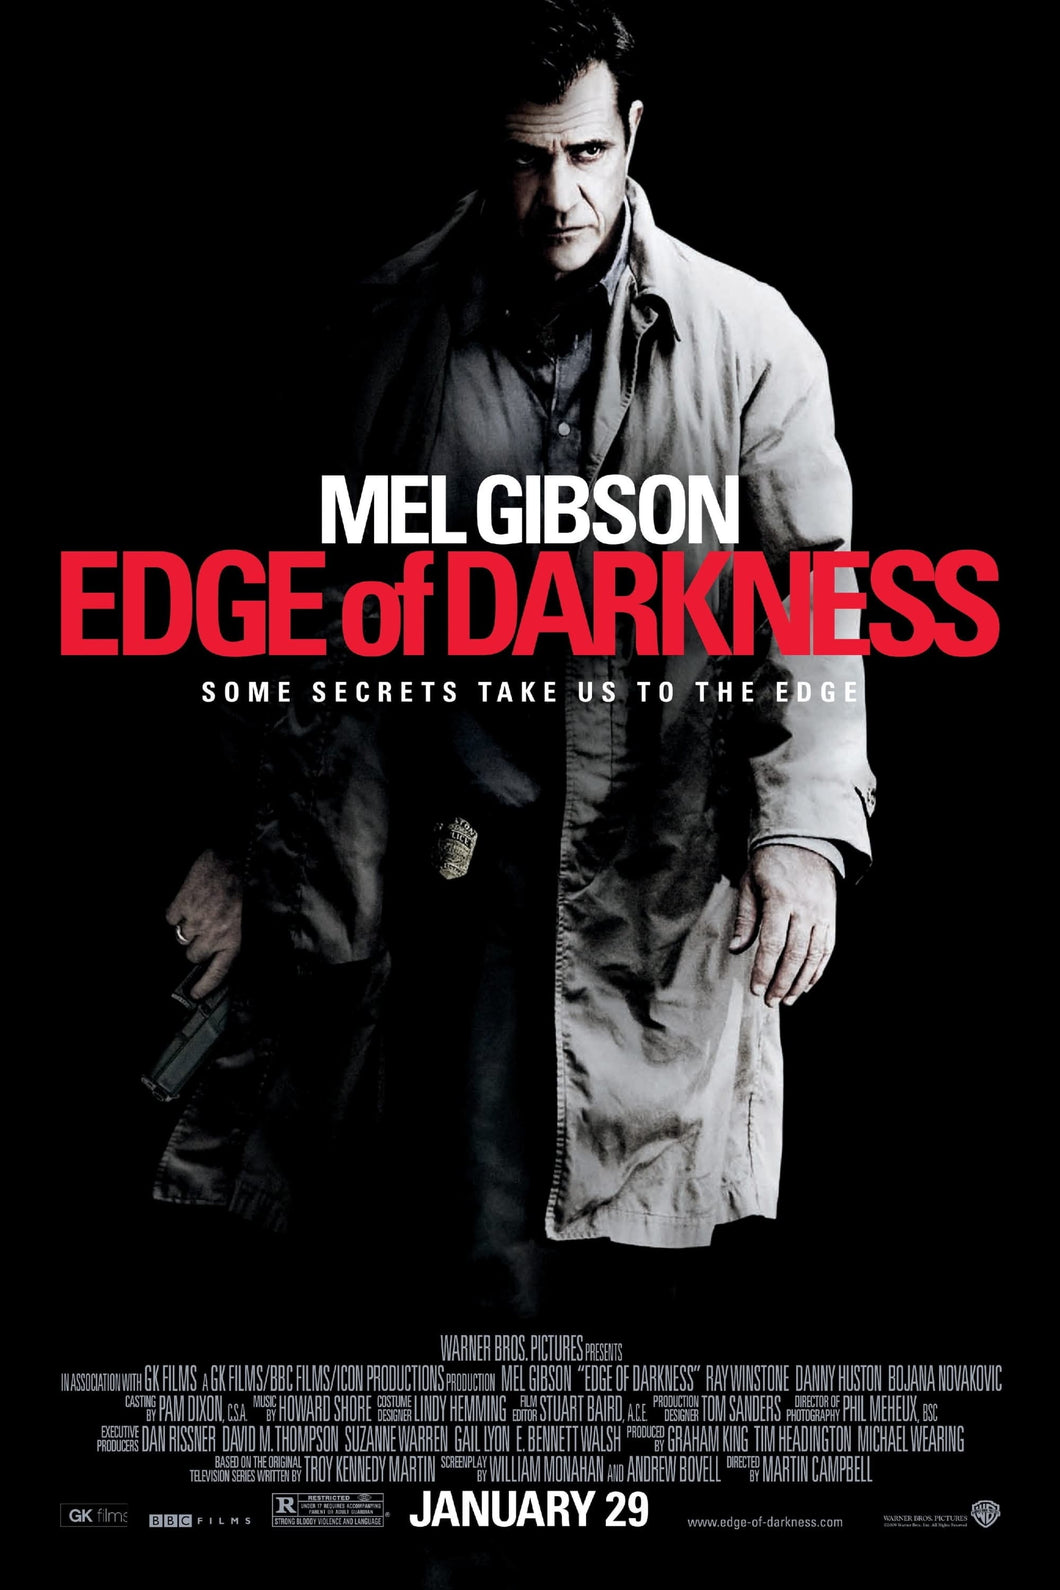 Edge Of Darkness (2010) Mel Gibson v1 Movie Poster High Quality Glossy Paper A1 A2 A3 A4 A3 Framed or Unframed!!!